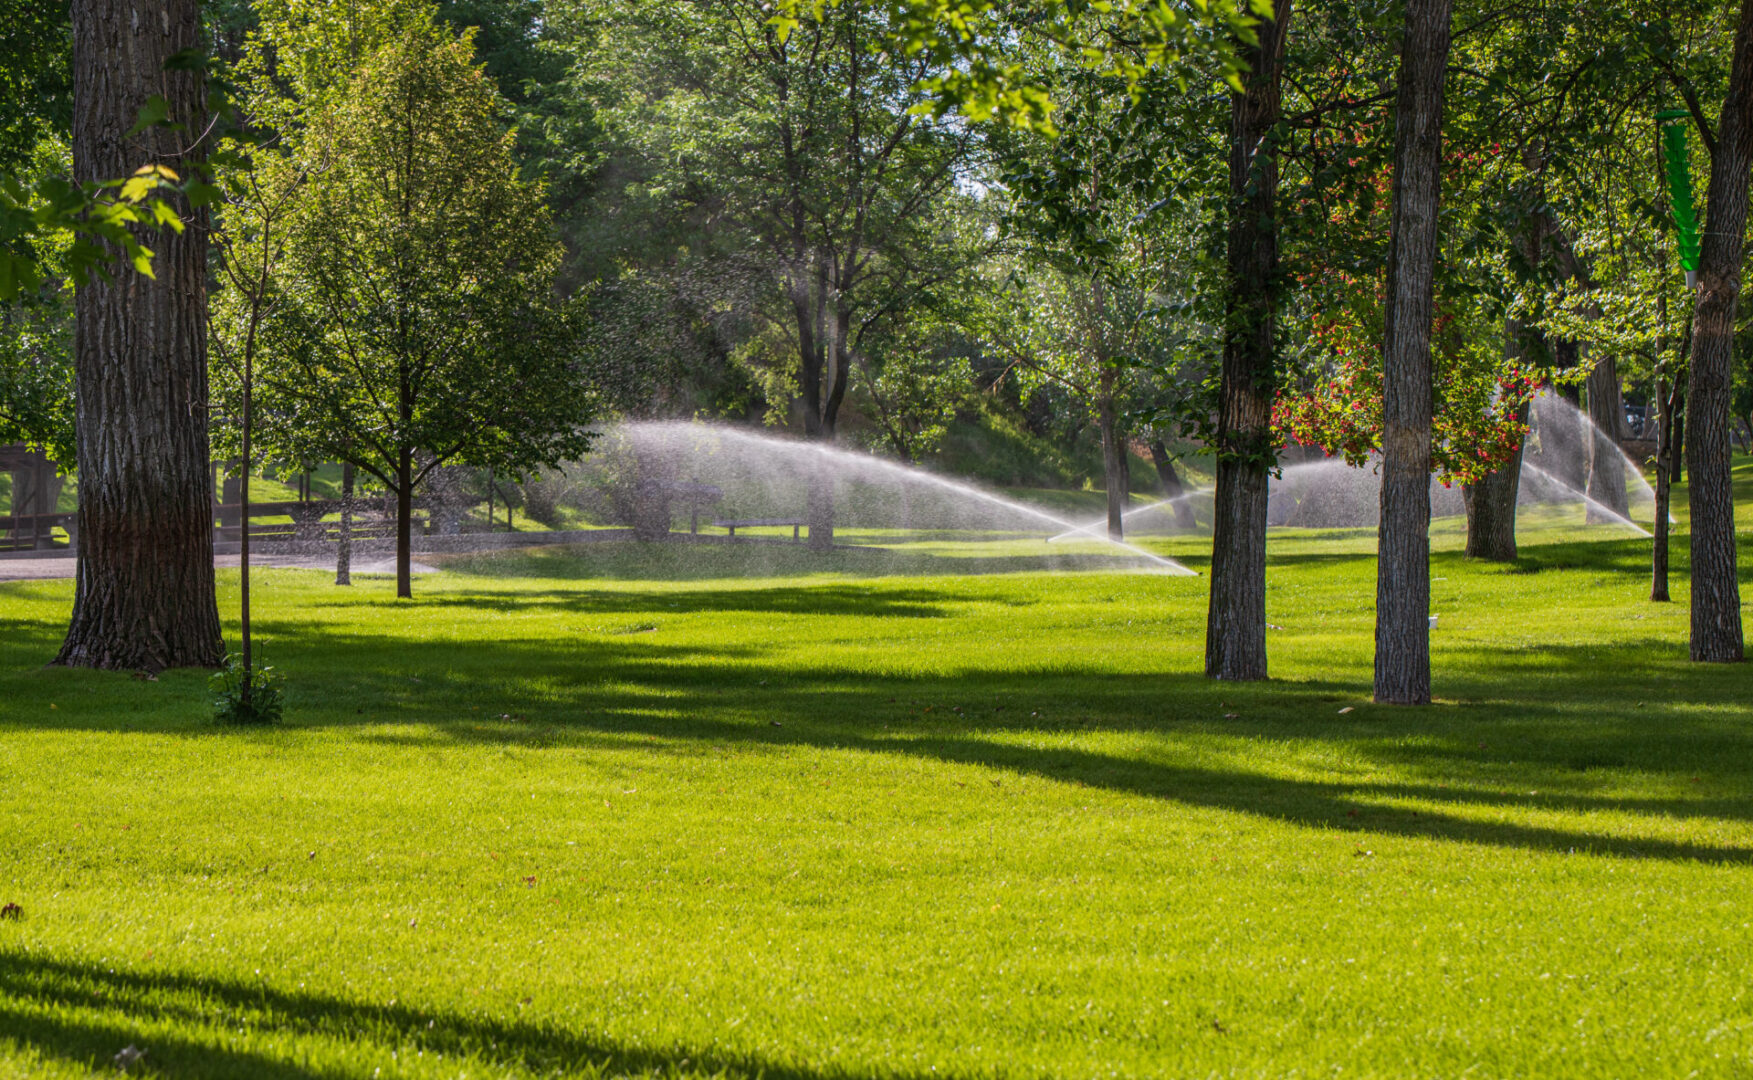 A lawn with trees and water sprinklers spraying.